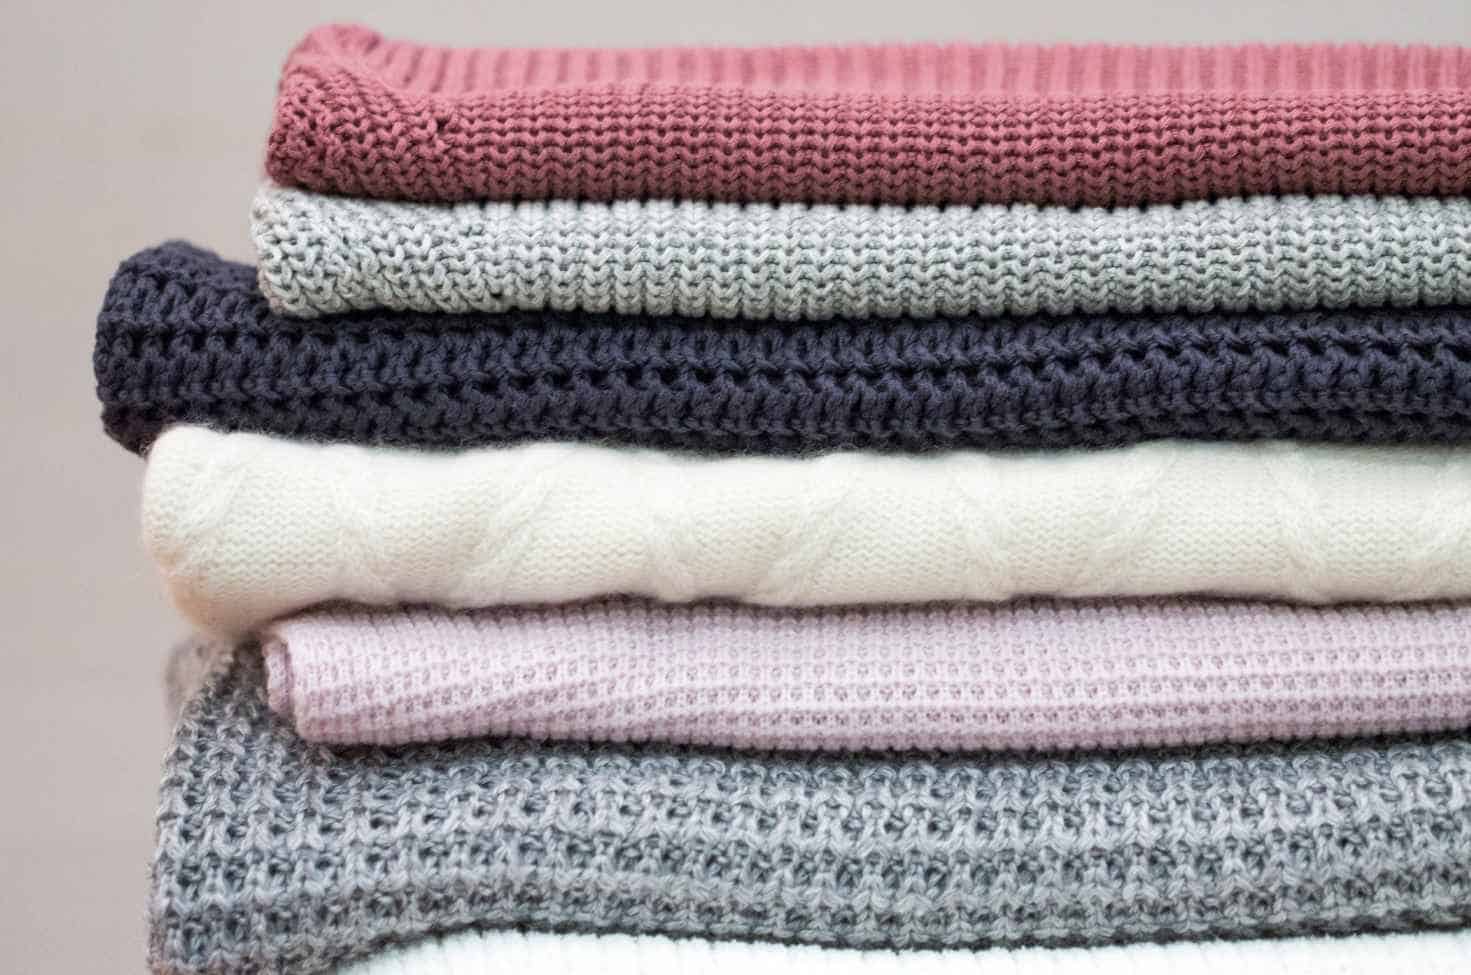 How to Store a Sweater to Save Space